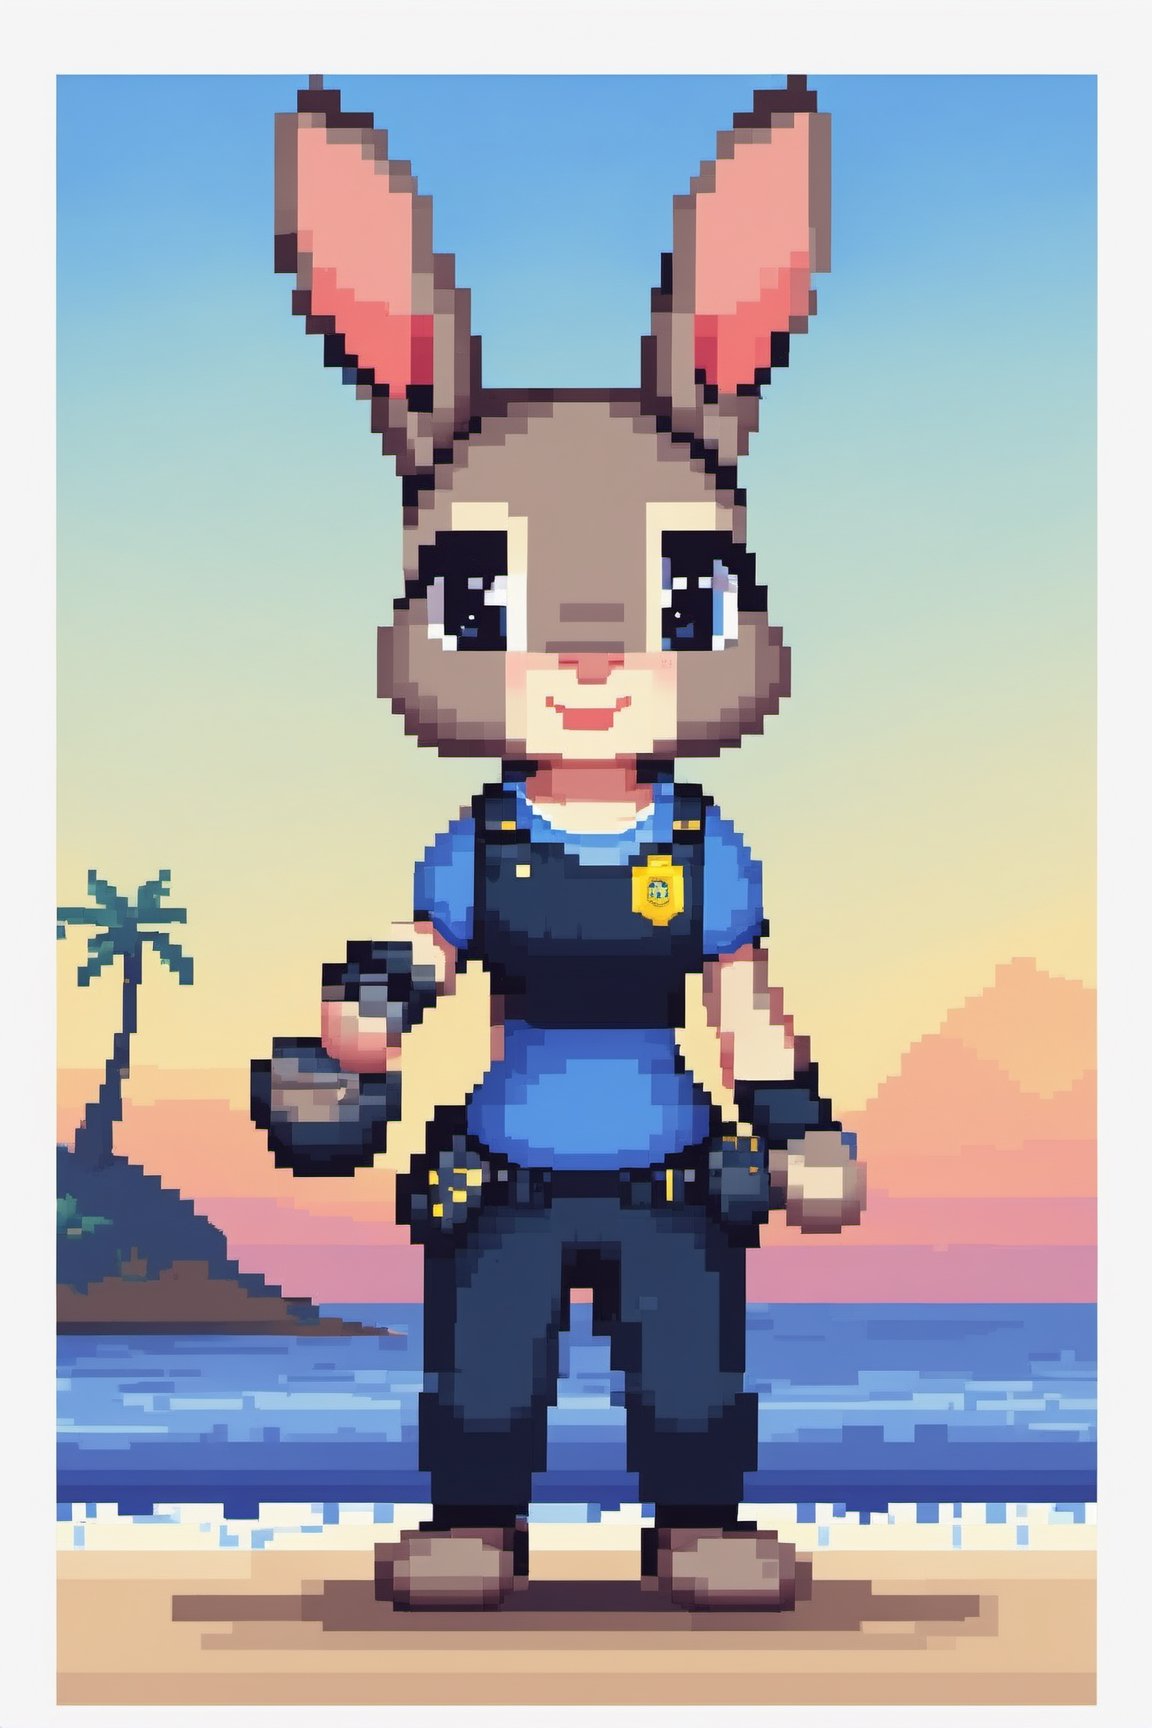 Full body pixel style image of jxdhxps character, police outfit, pixel style, background of a beach